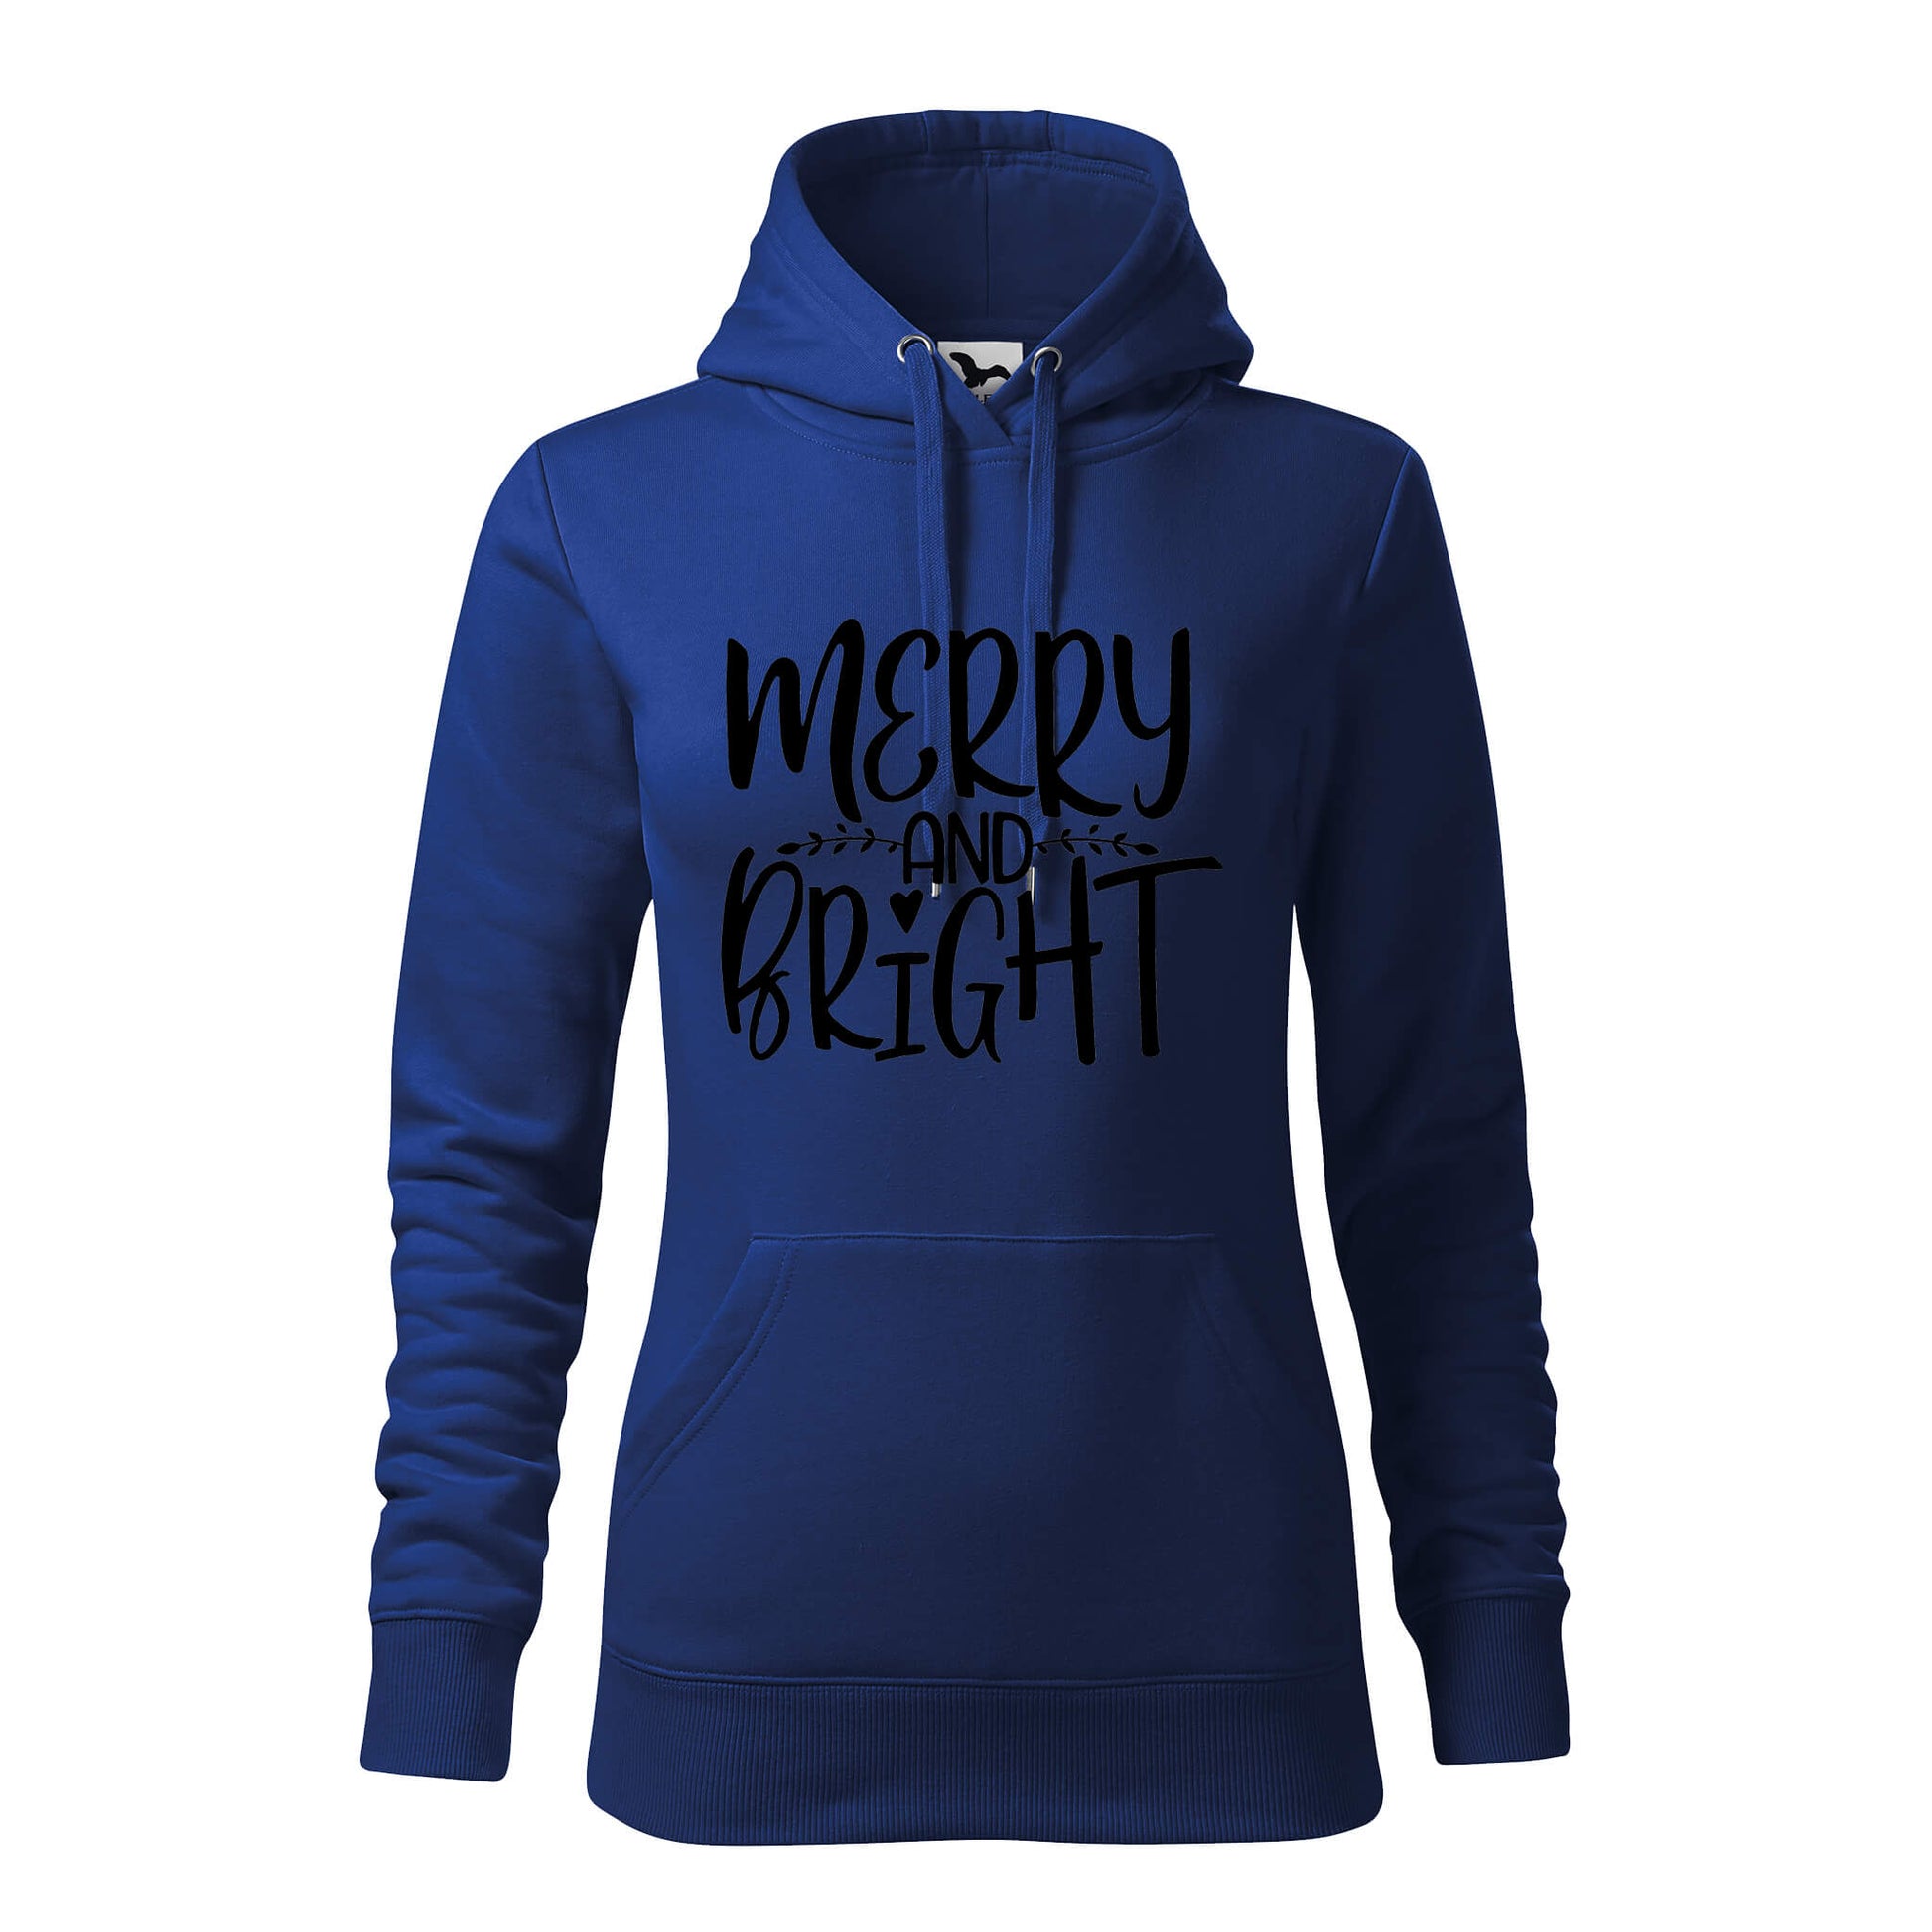 Merry and bright hoodie - rvdesignprint